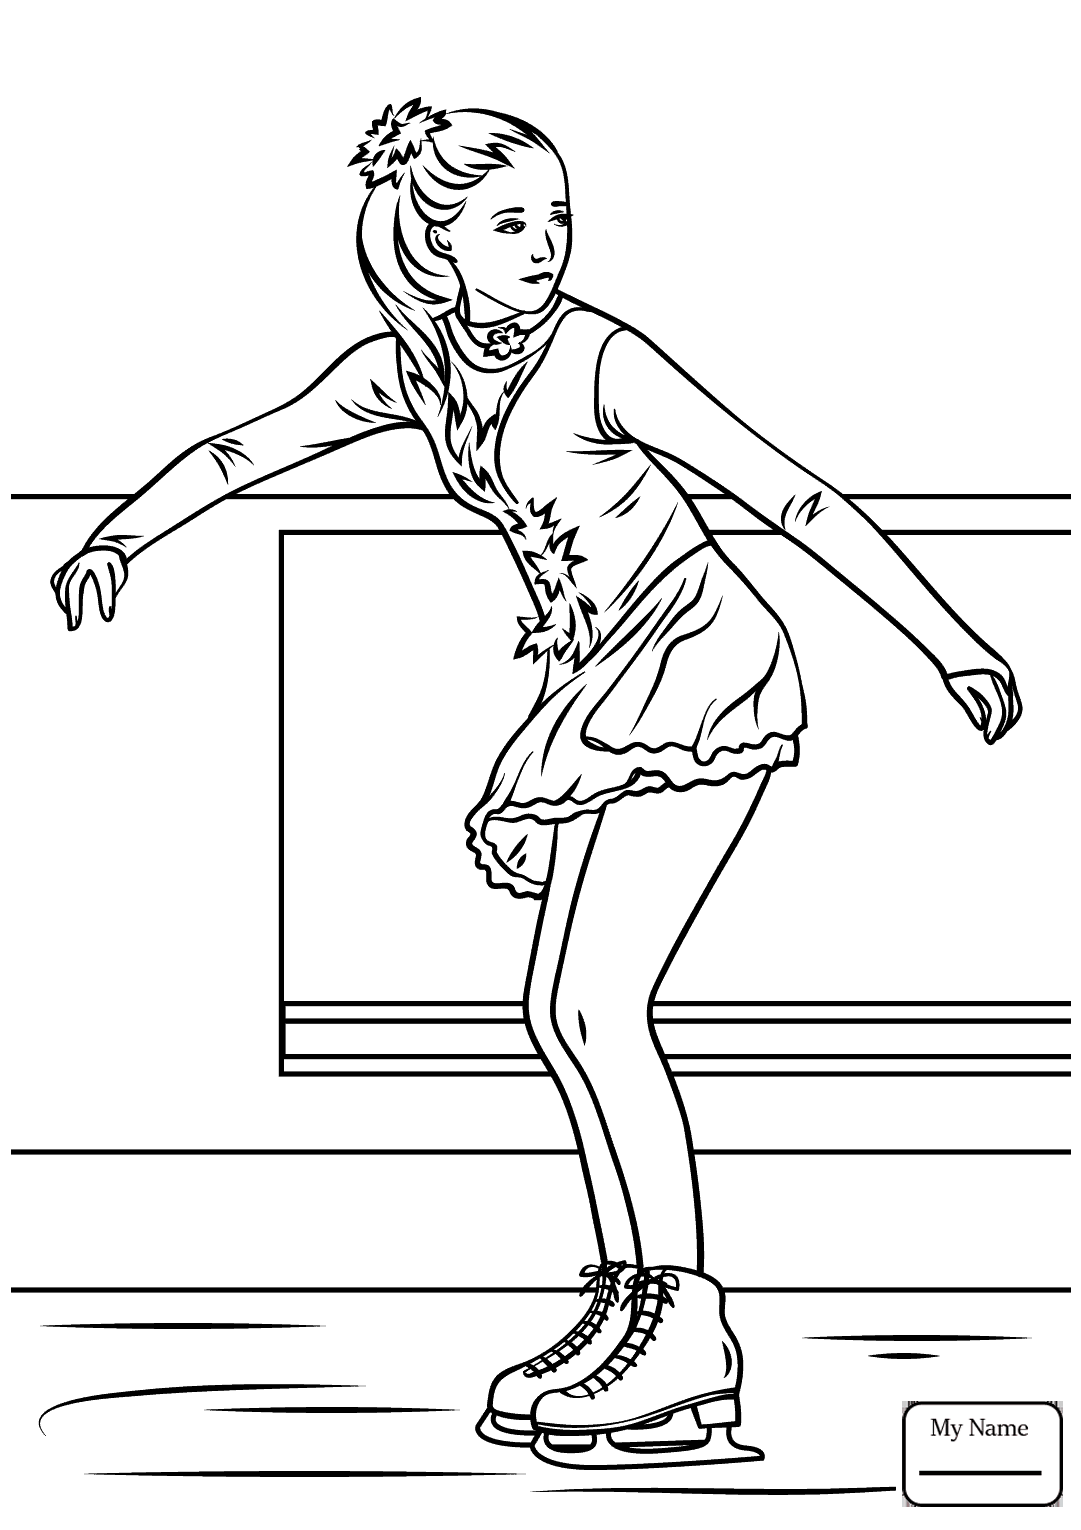 ice-skating-coloring-pages-learny-kids